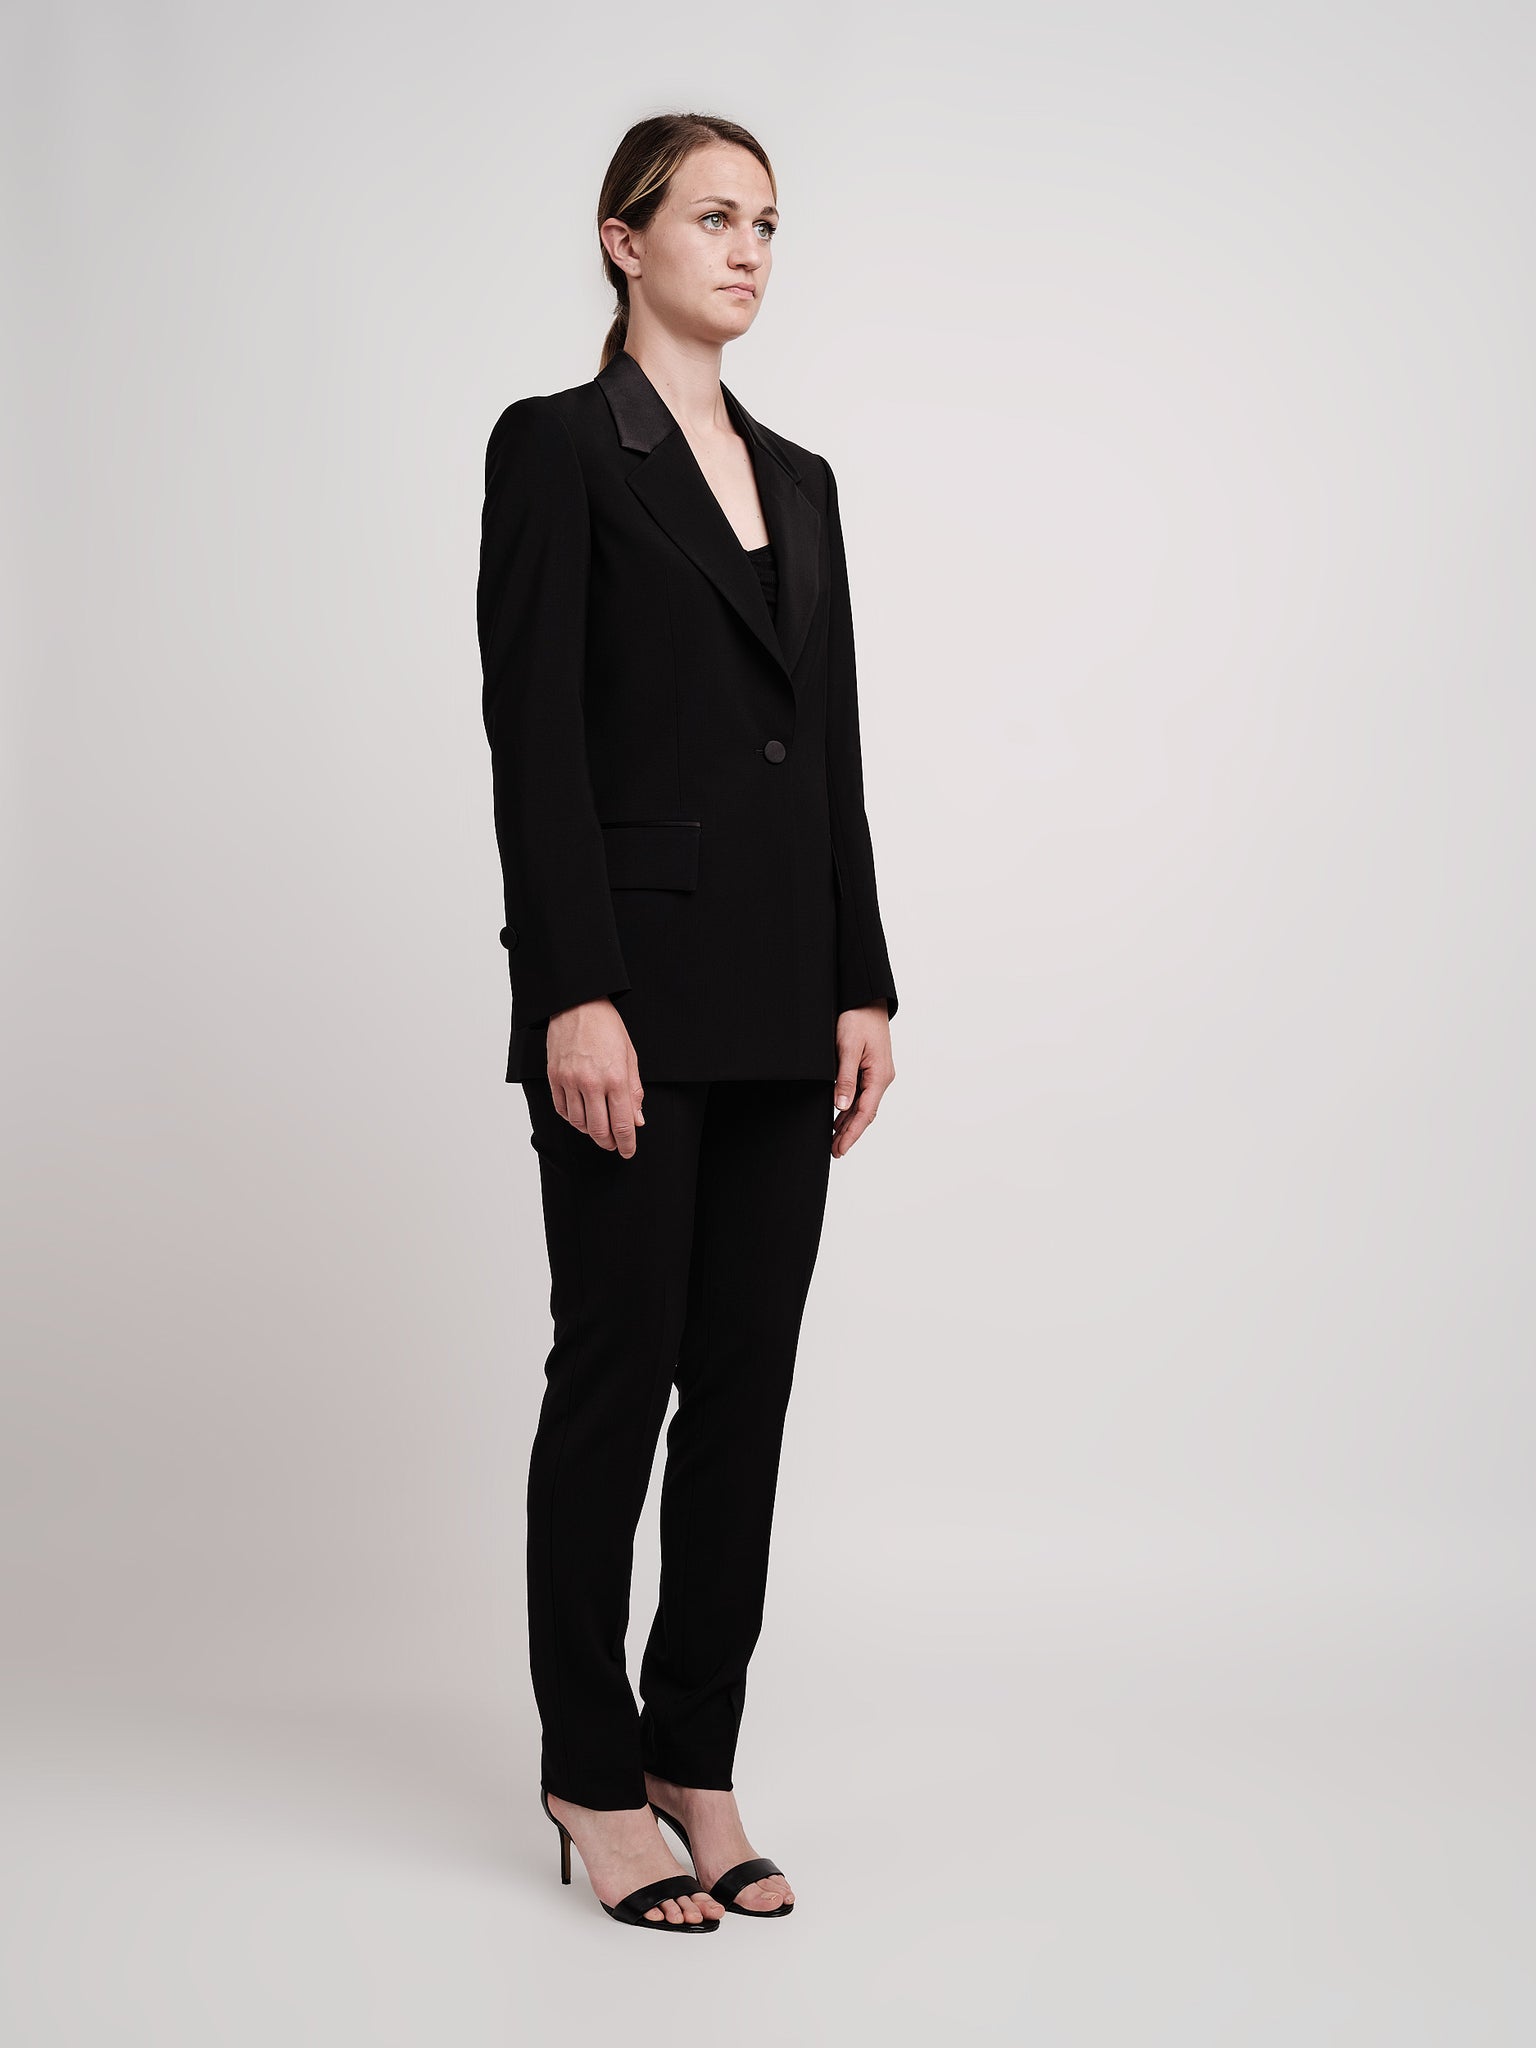 BOSS Tuxedos — choose from 9 from 249 €